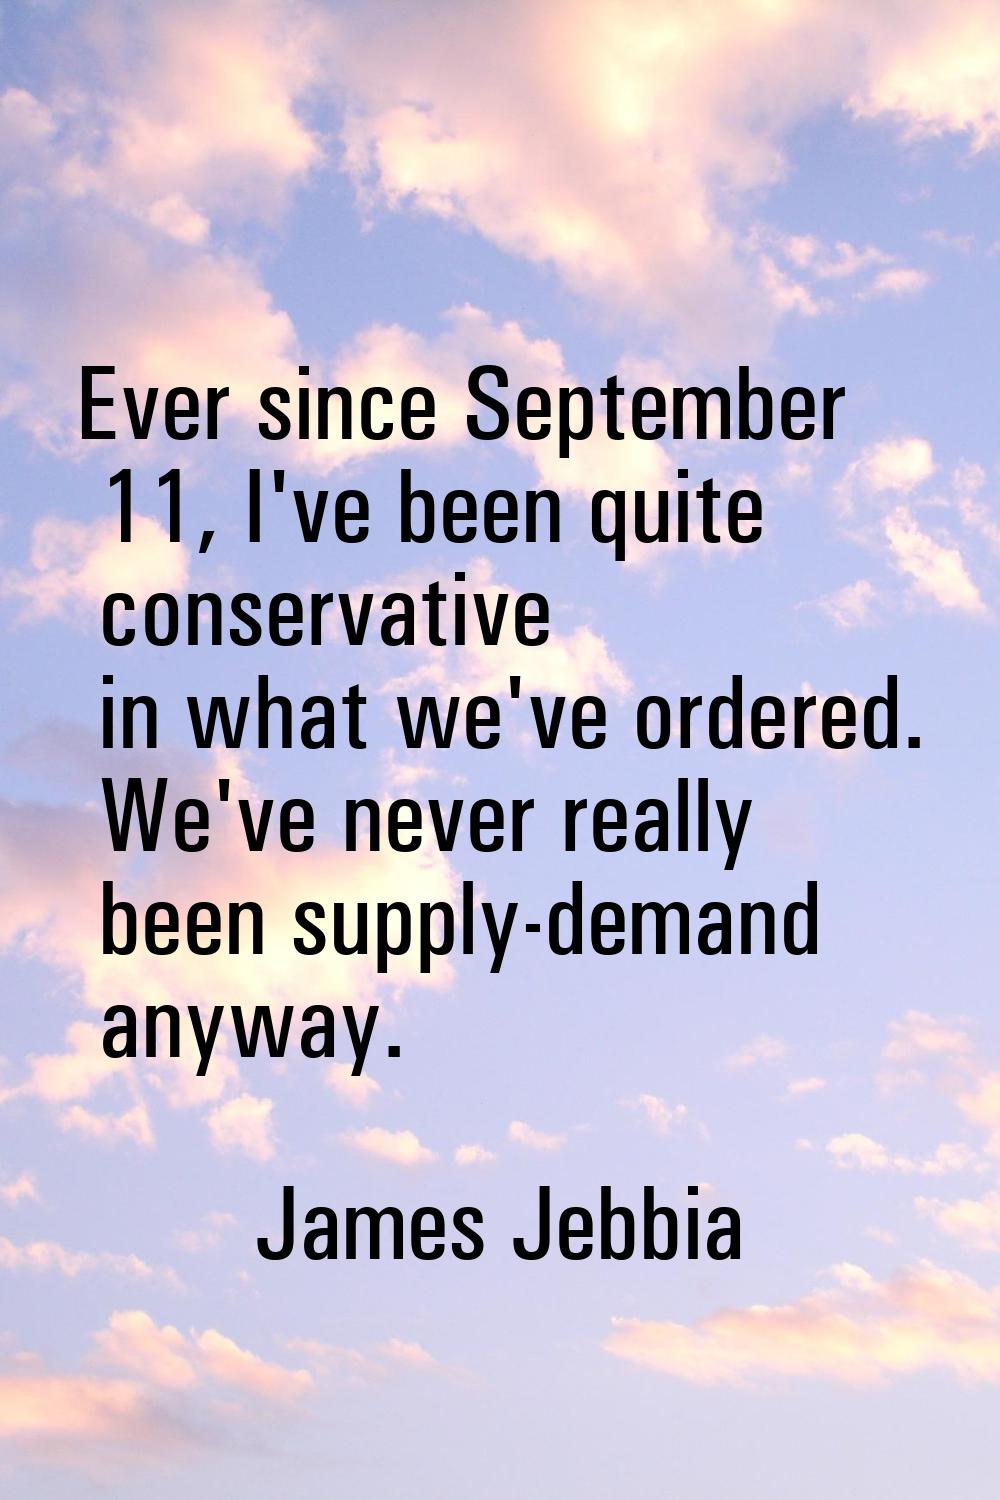 Ever since September 11, I've been quite conservative in what we've ordered. We've never really bee